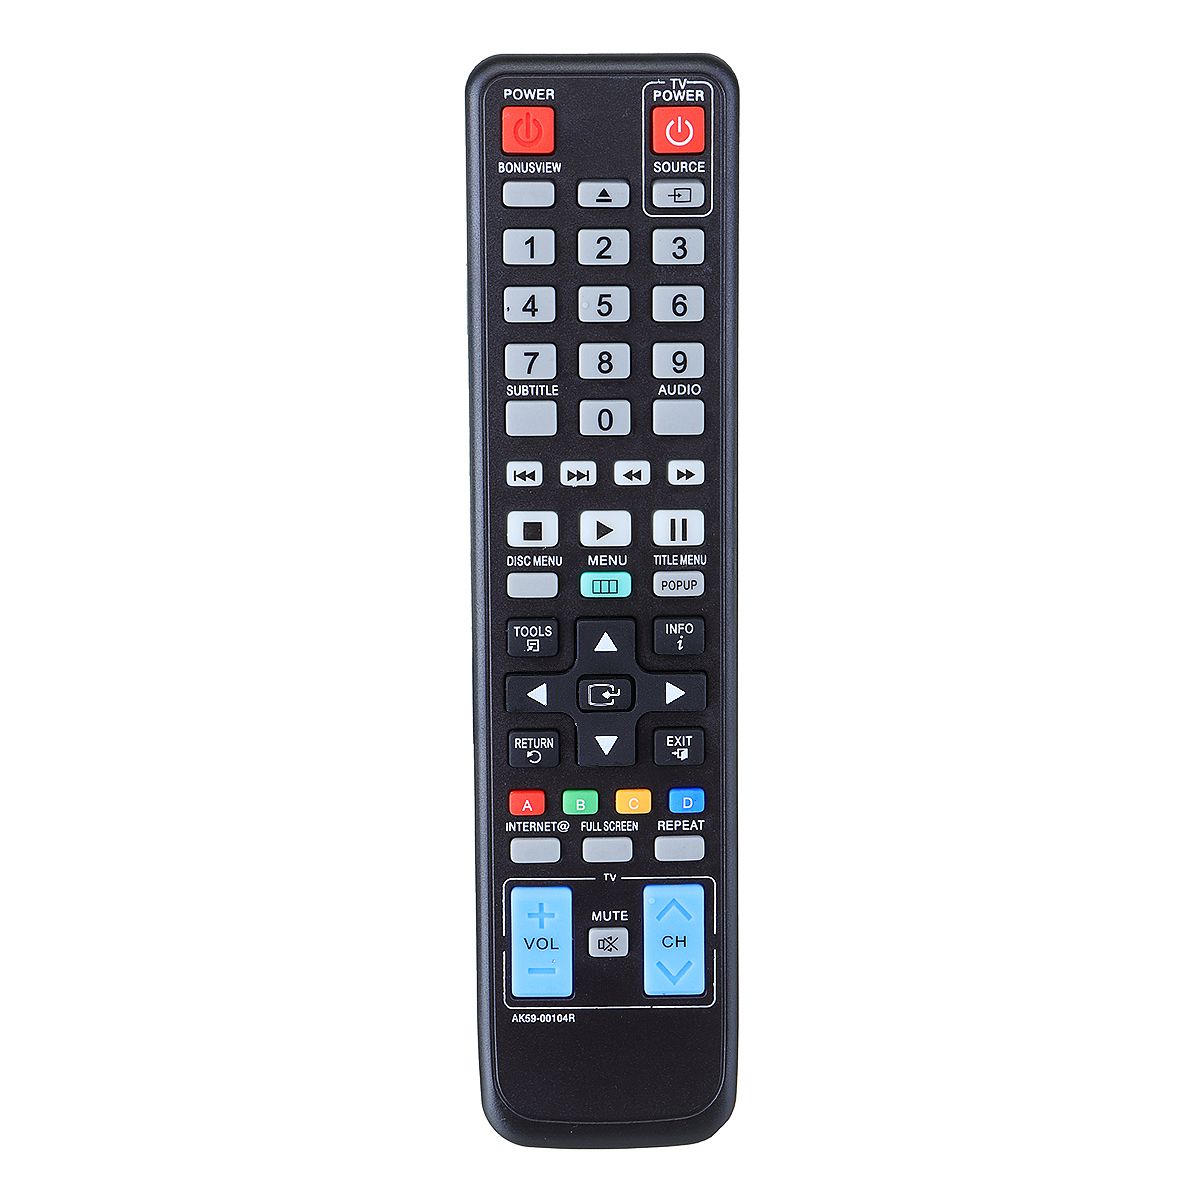 Replacement-Remote-Control-For-Samsung-BD-C5300-BD-C5500-BD-D5100-BD-C7500-Blu-ray-DVD-Player-1396673